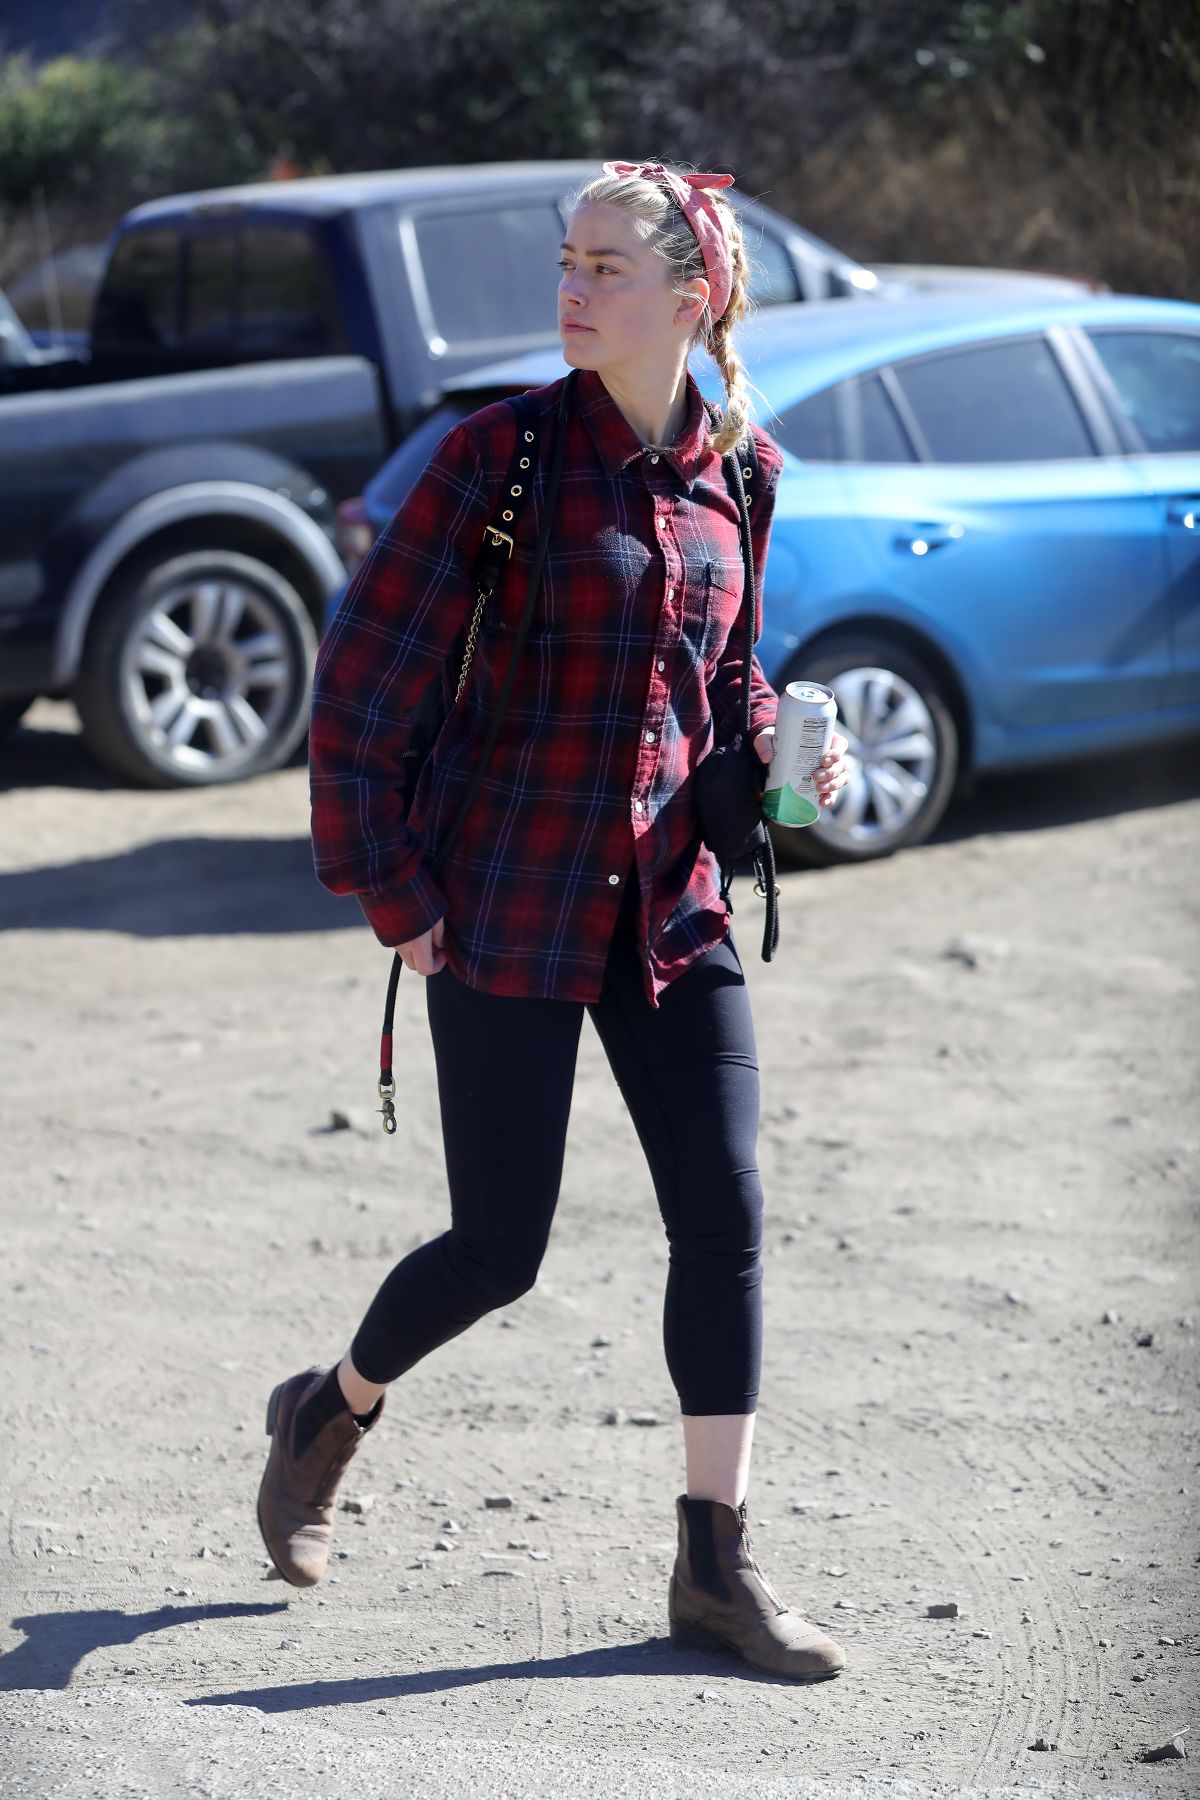 amber-heard-out-hiking-in-los-angeles-11-13-2020-6.jpg